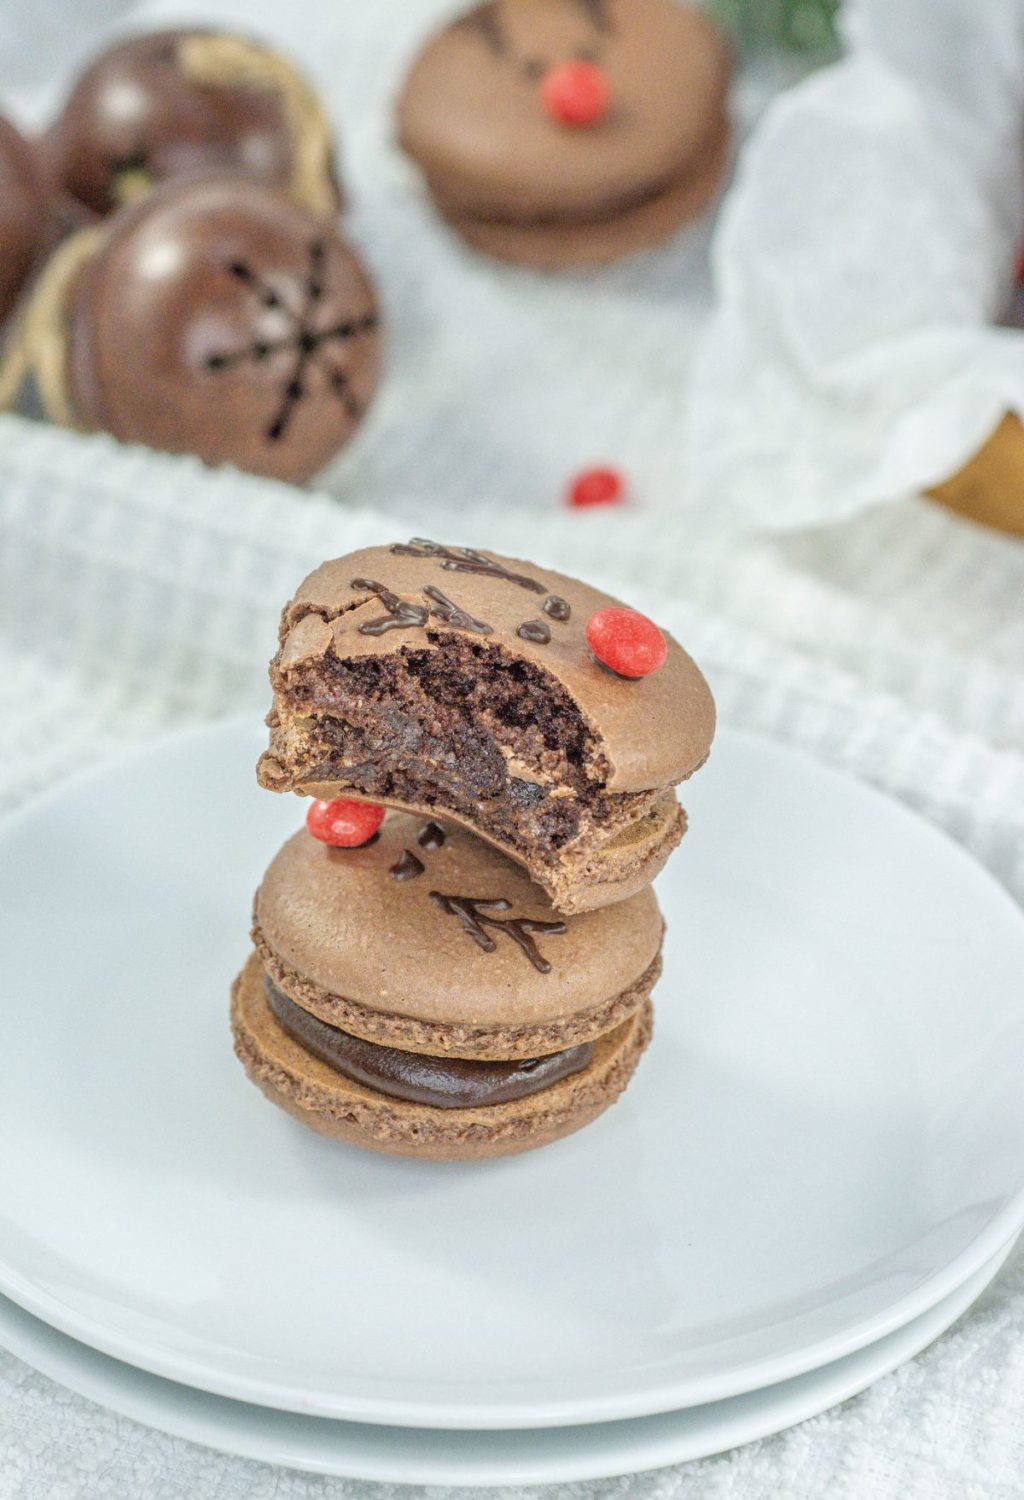 Two chocolate macarons stacked on top of each other.